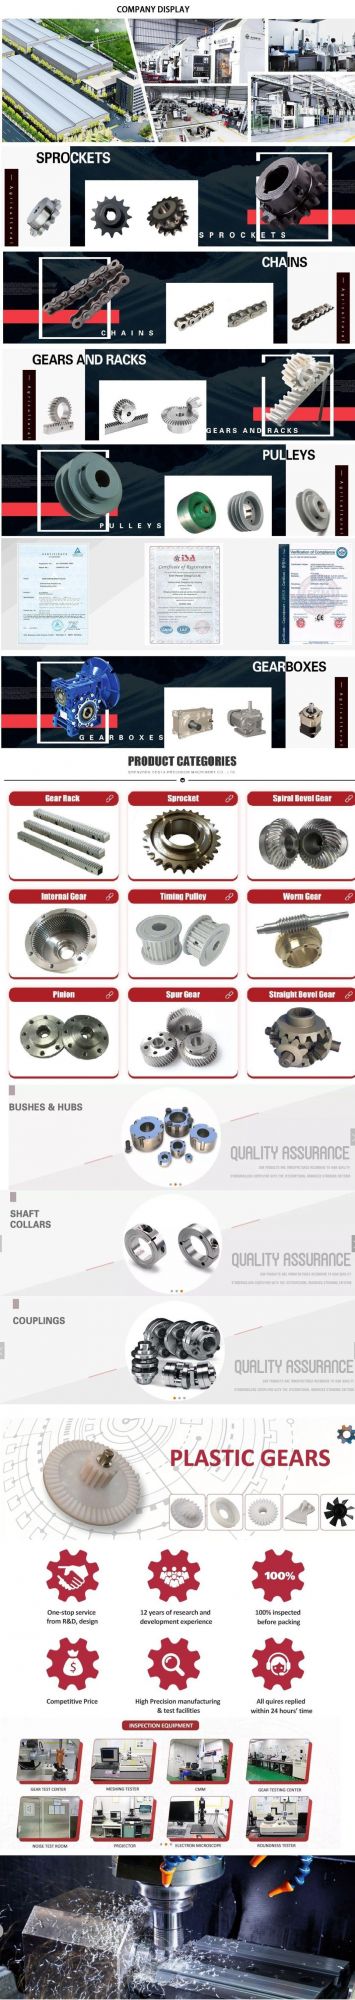 Ball Bearing Size Prices Small Puller Price List Connecting Rod Slides Hybrid Ceramic Catalogue Release Pulley Bearings Skate Wheel Hub Stainless Steel Magnetic